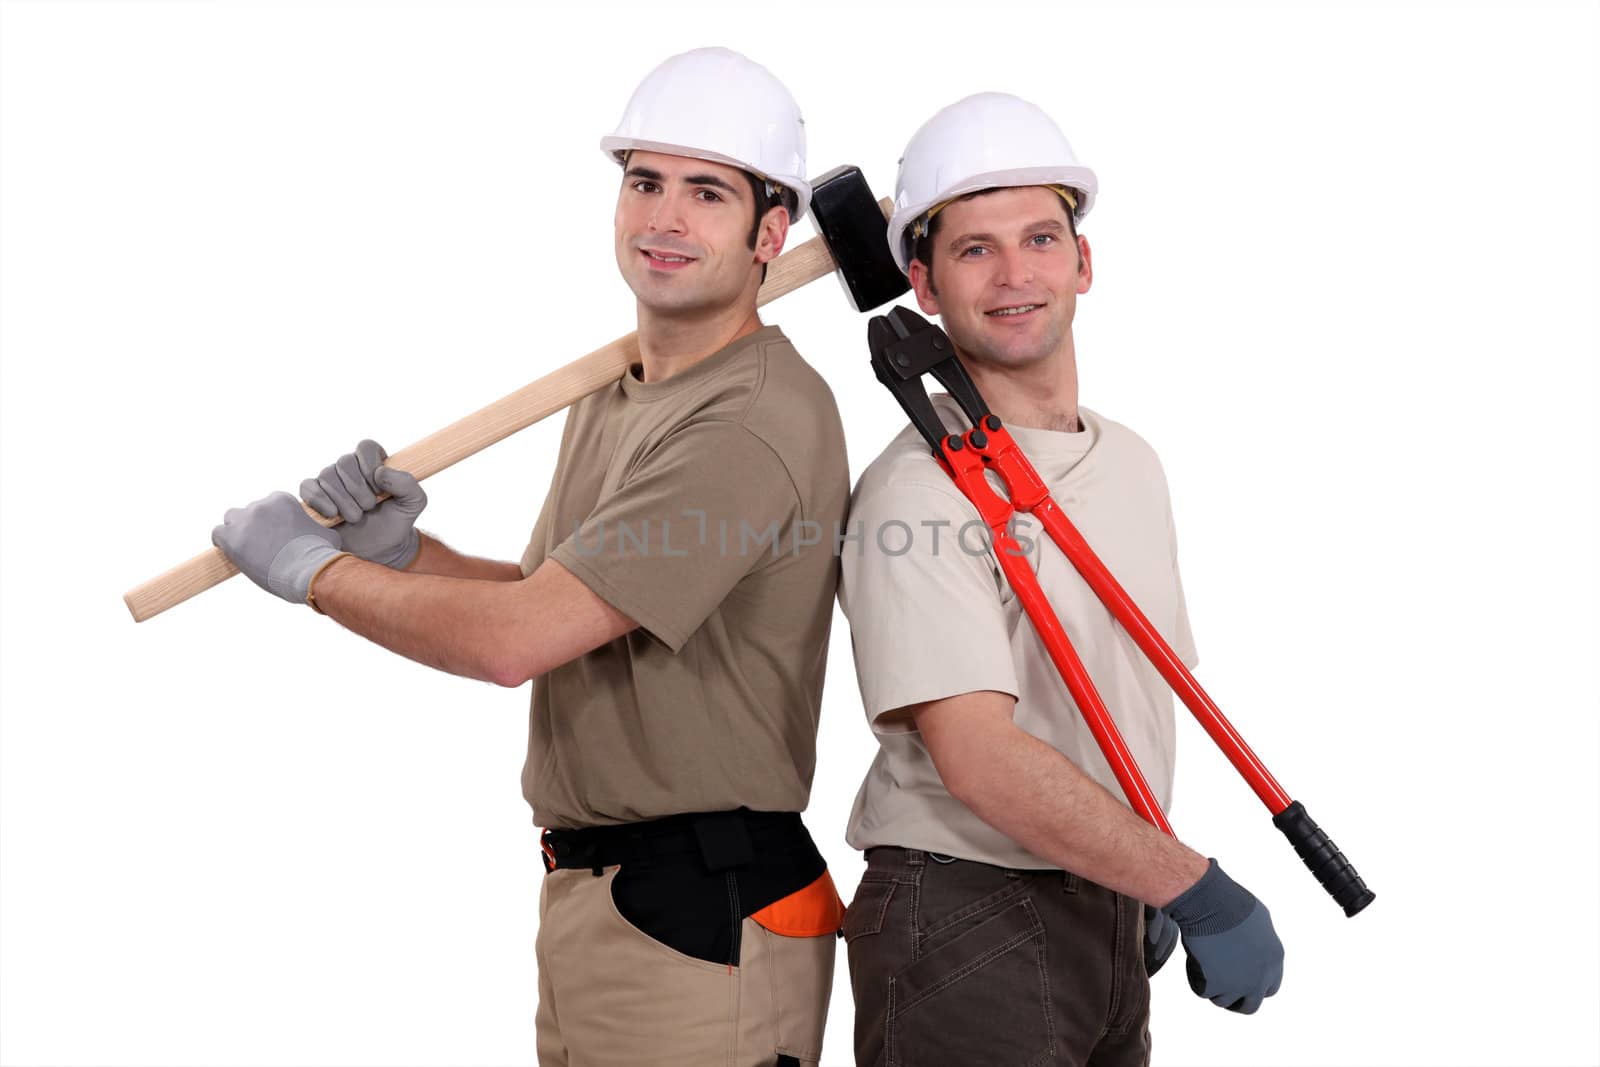 Construction worker holding heavy-duty tools by phovoir